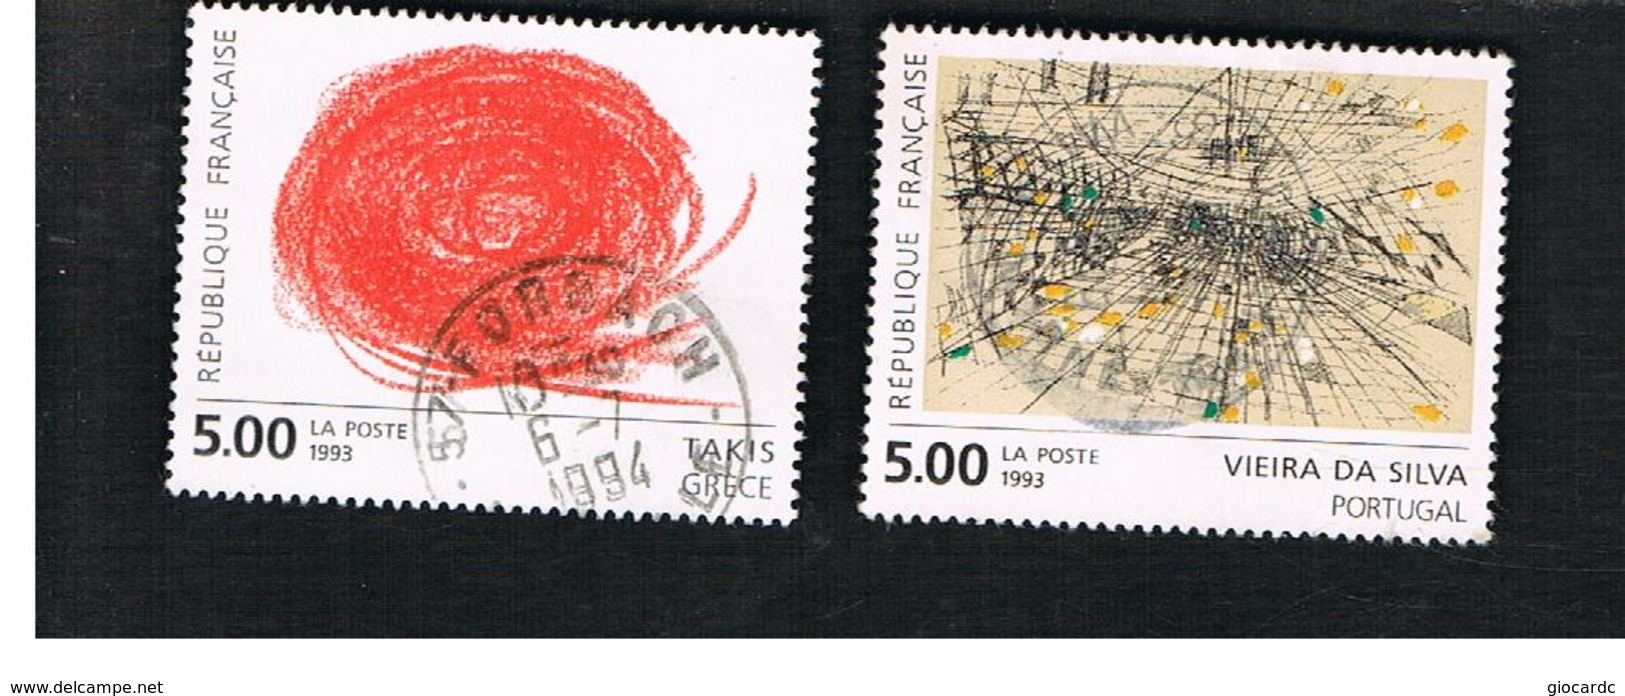 FRANCIA (FRANCE) - SG 3154.3155  - 1993  CONTEMPORARY EUROPEAN ART (COMPLET SET OF 2)   -    USED - Gebraucht